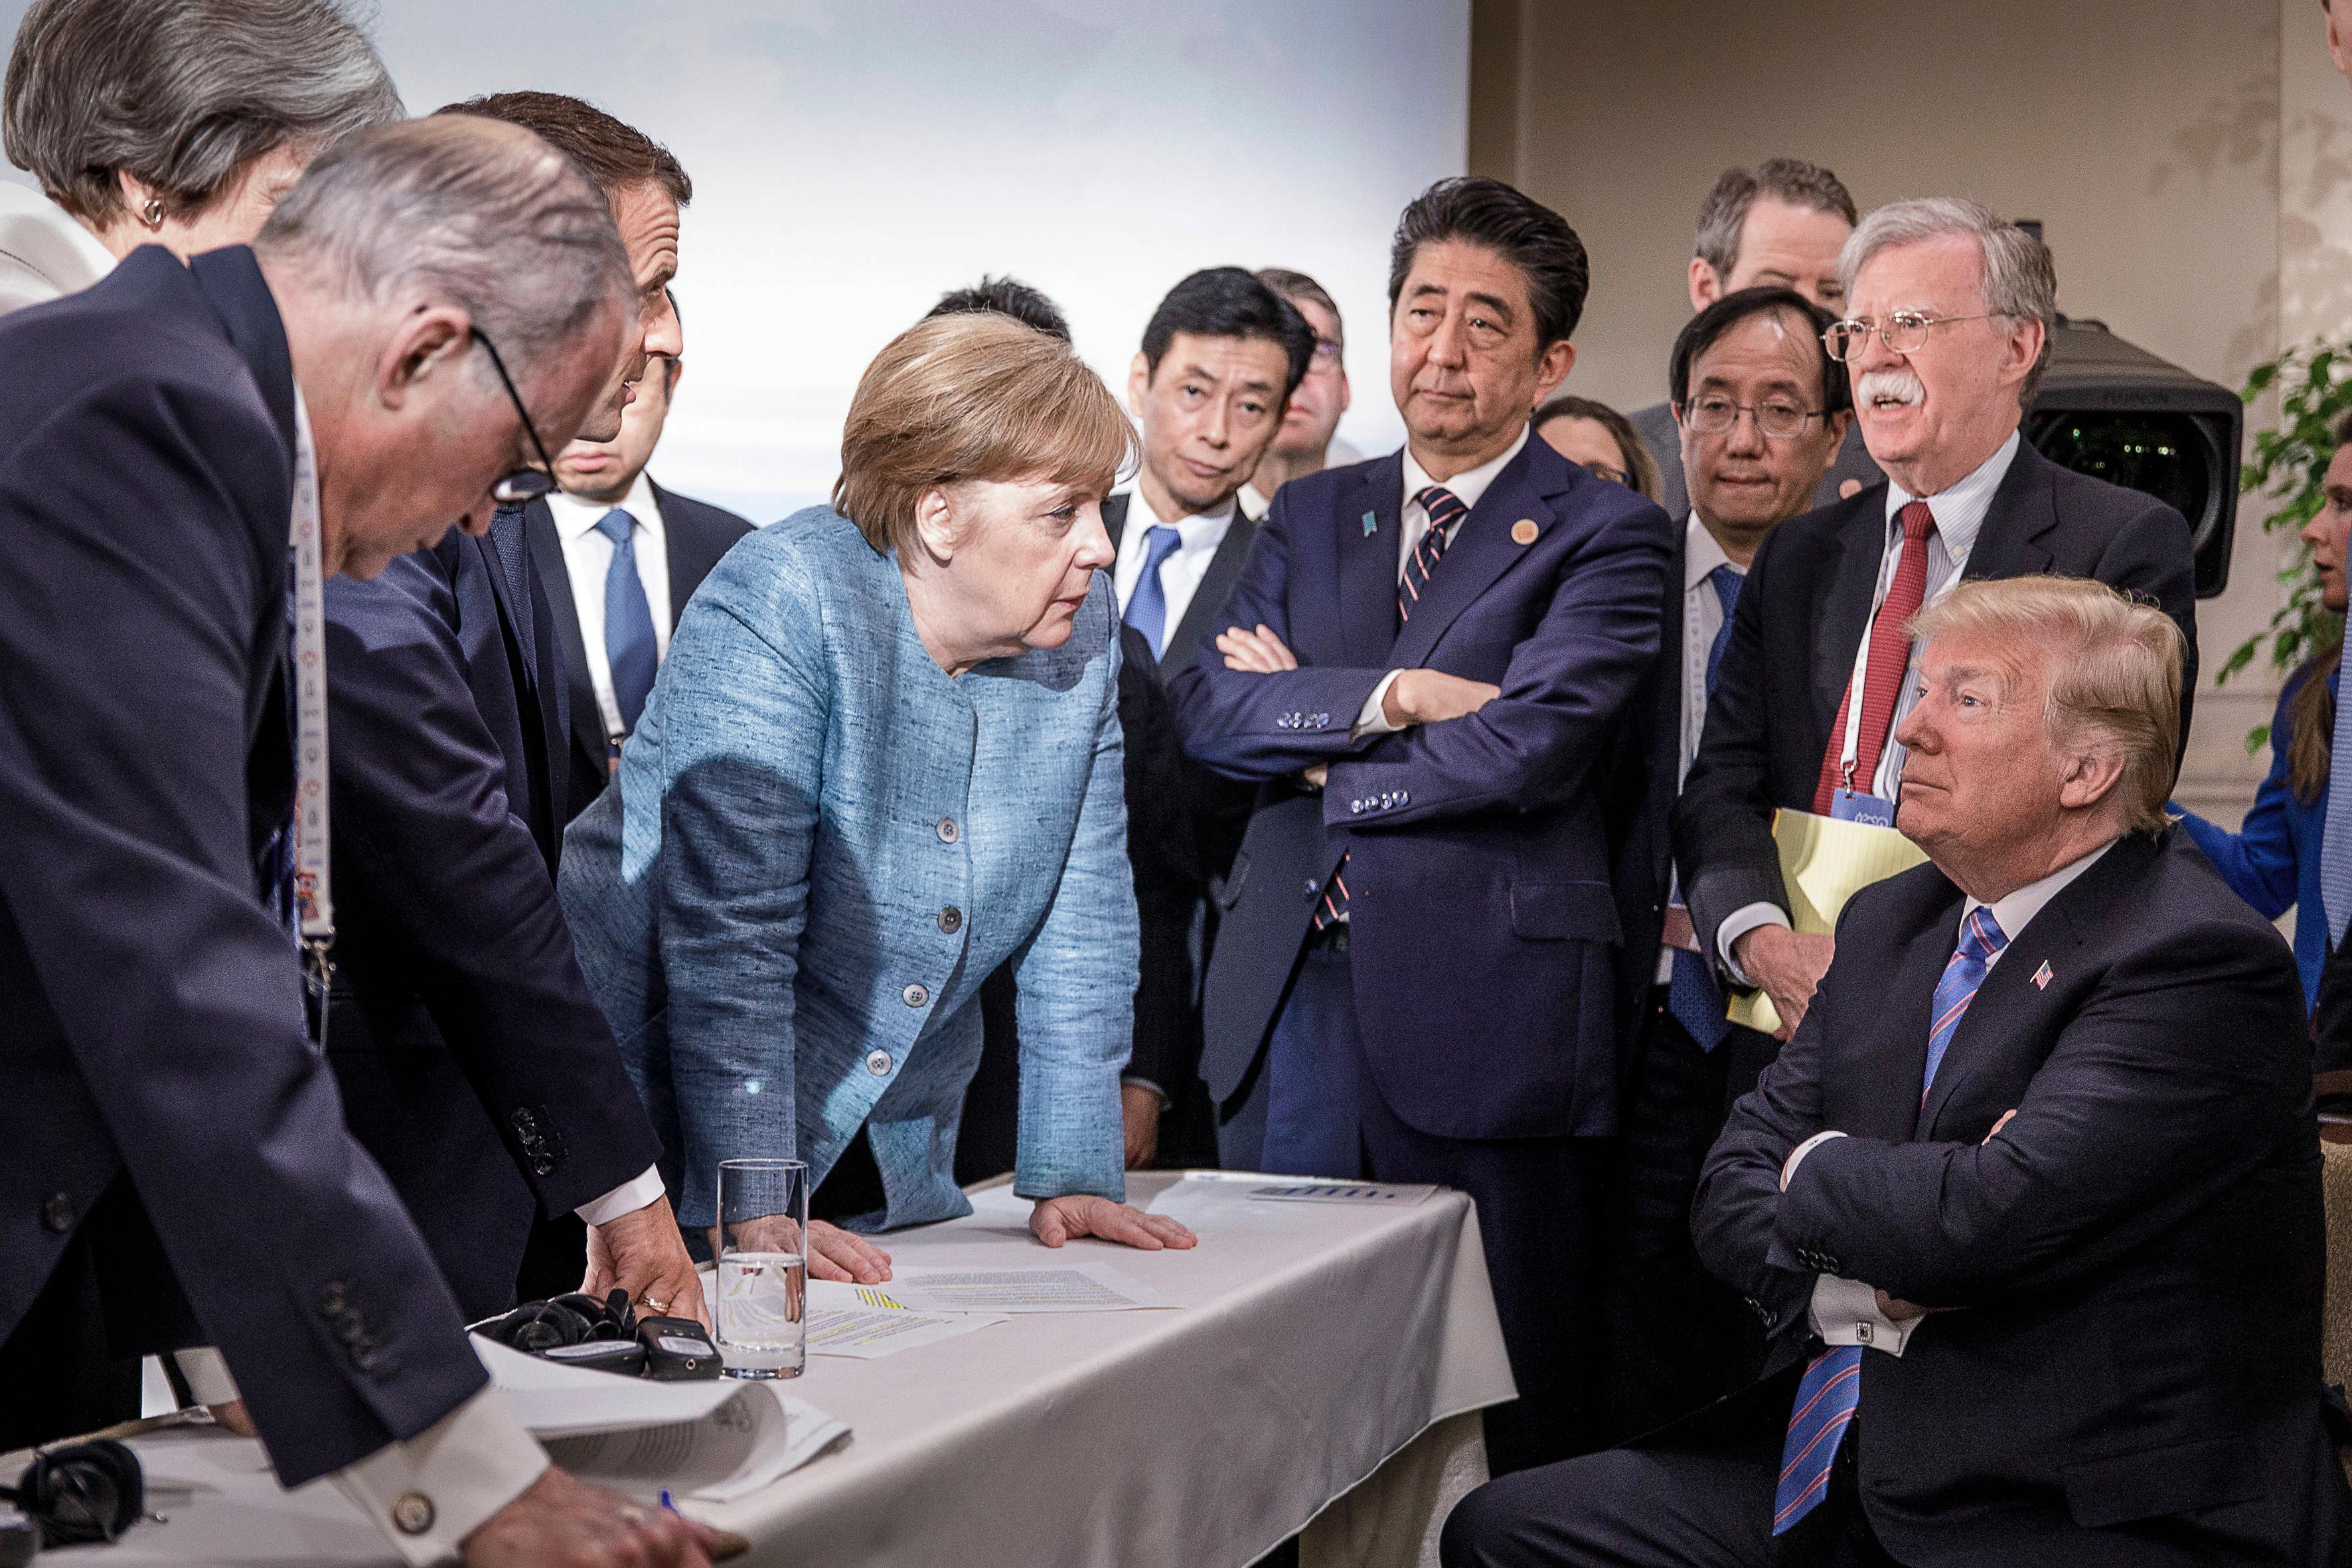 G7 leaders surround U.S. President Donald Trump, who is sitting down and watching, and his national security adviser John Bolton, the 44th G7 summit, La Malbaie, Quebec, Canada, June 9, 2018.